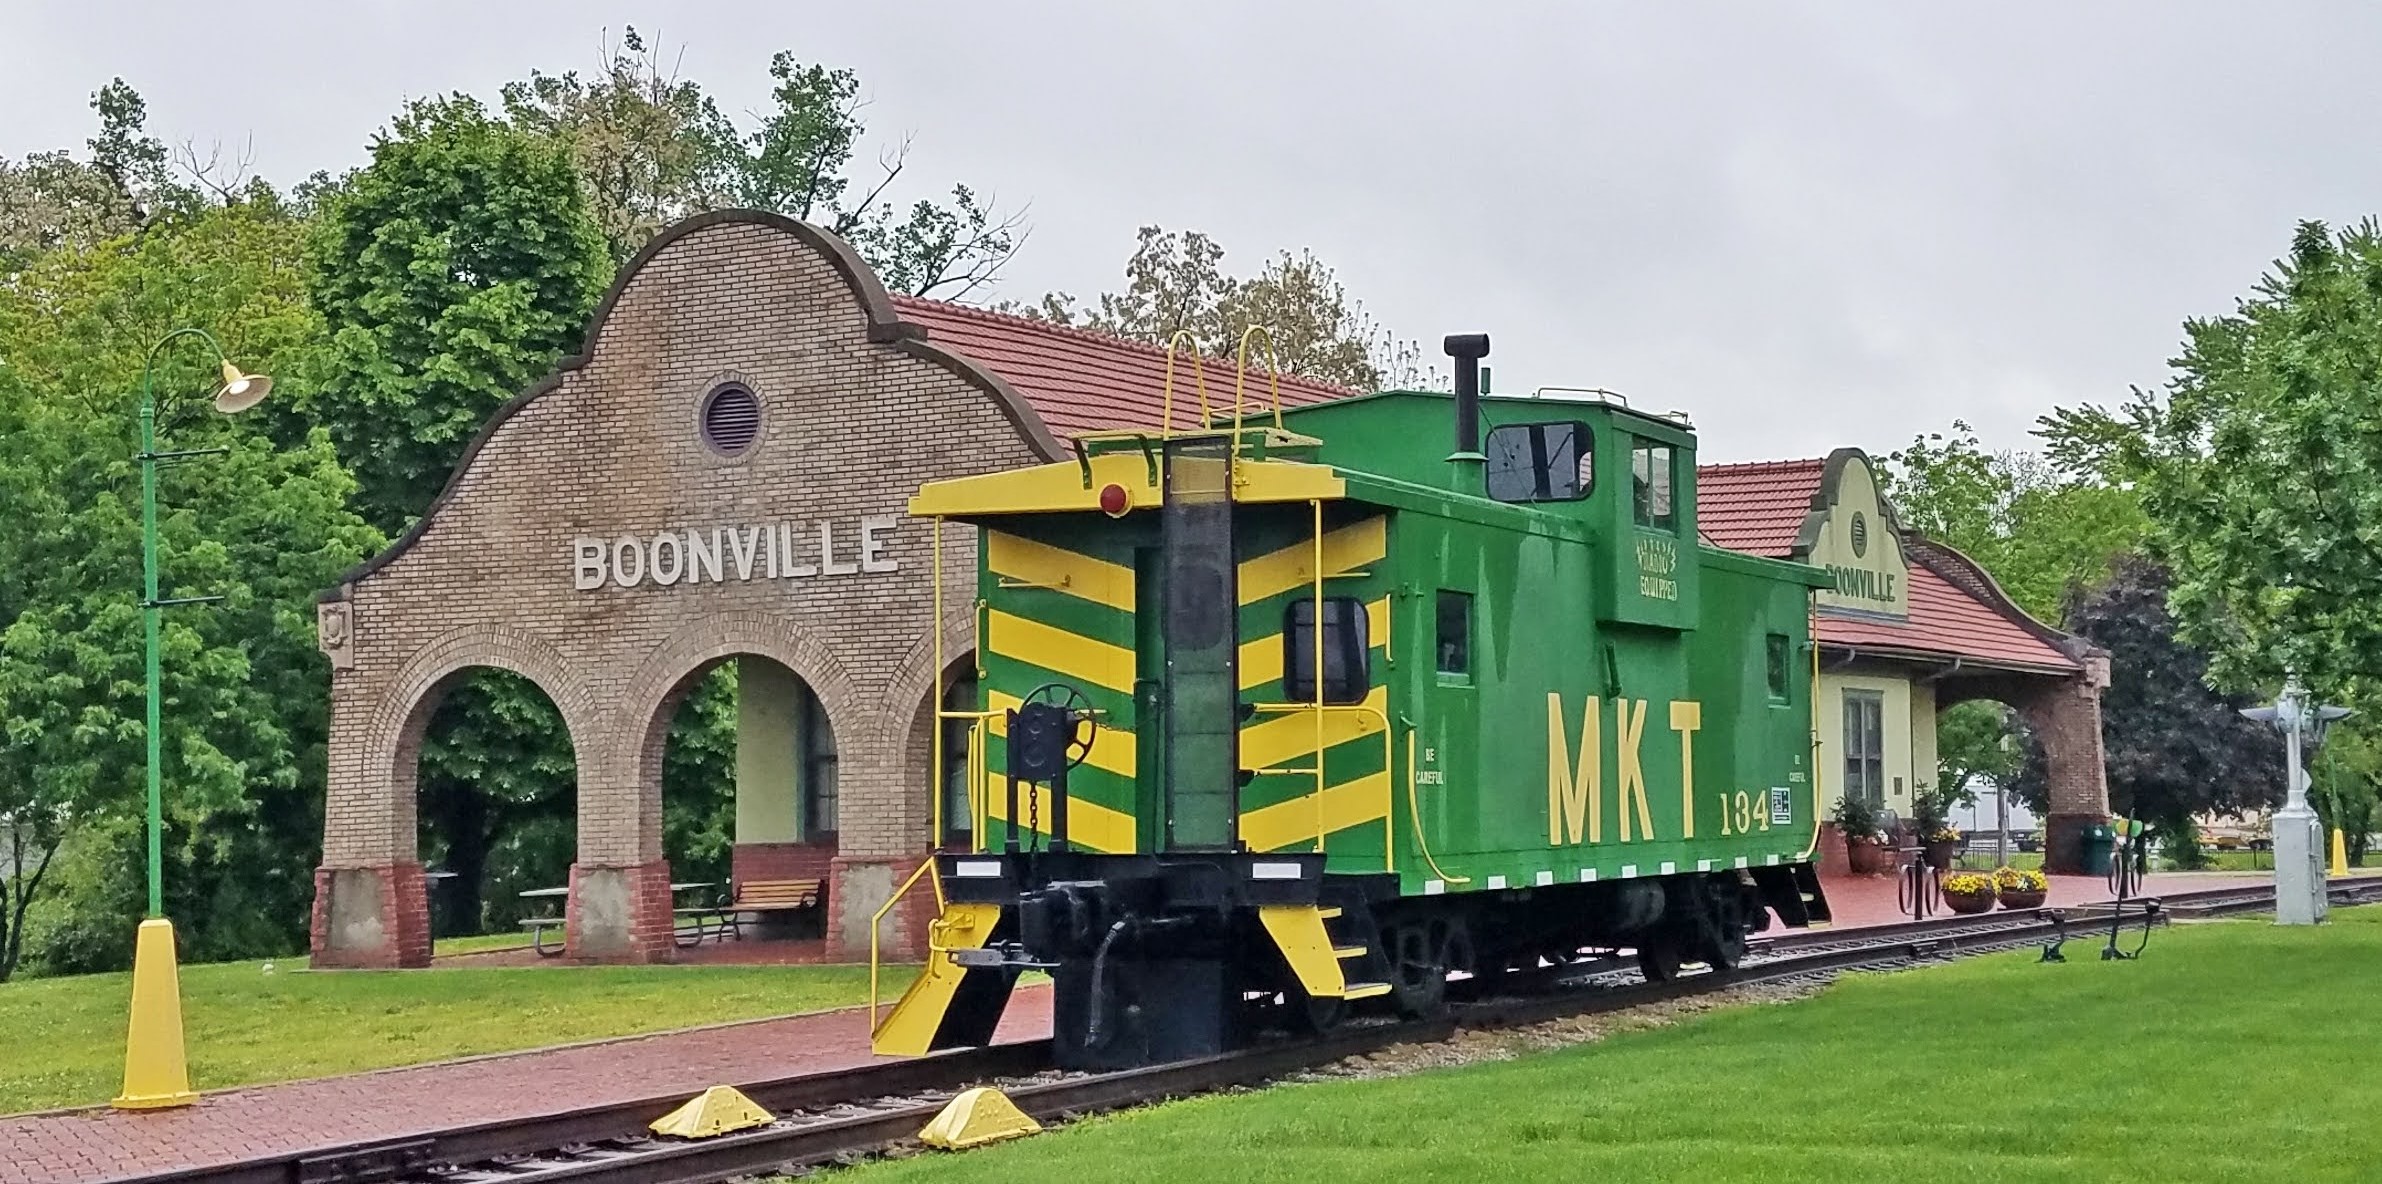 Project Spotlight: Enhanced Security for the City of Boonville, MO